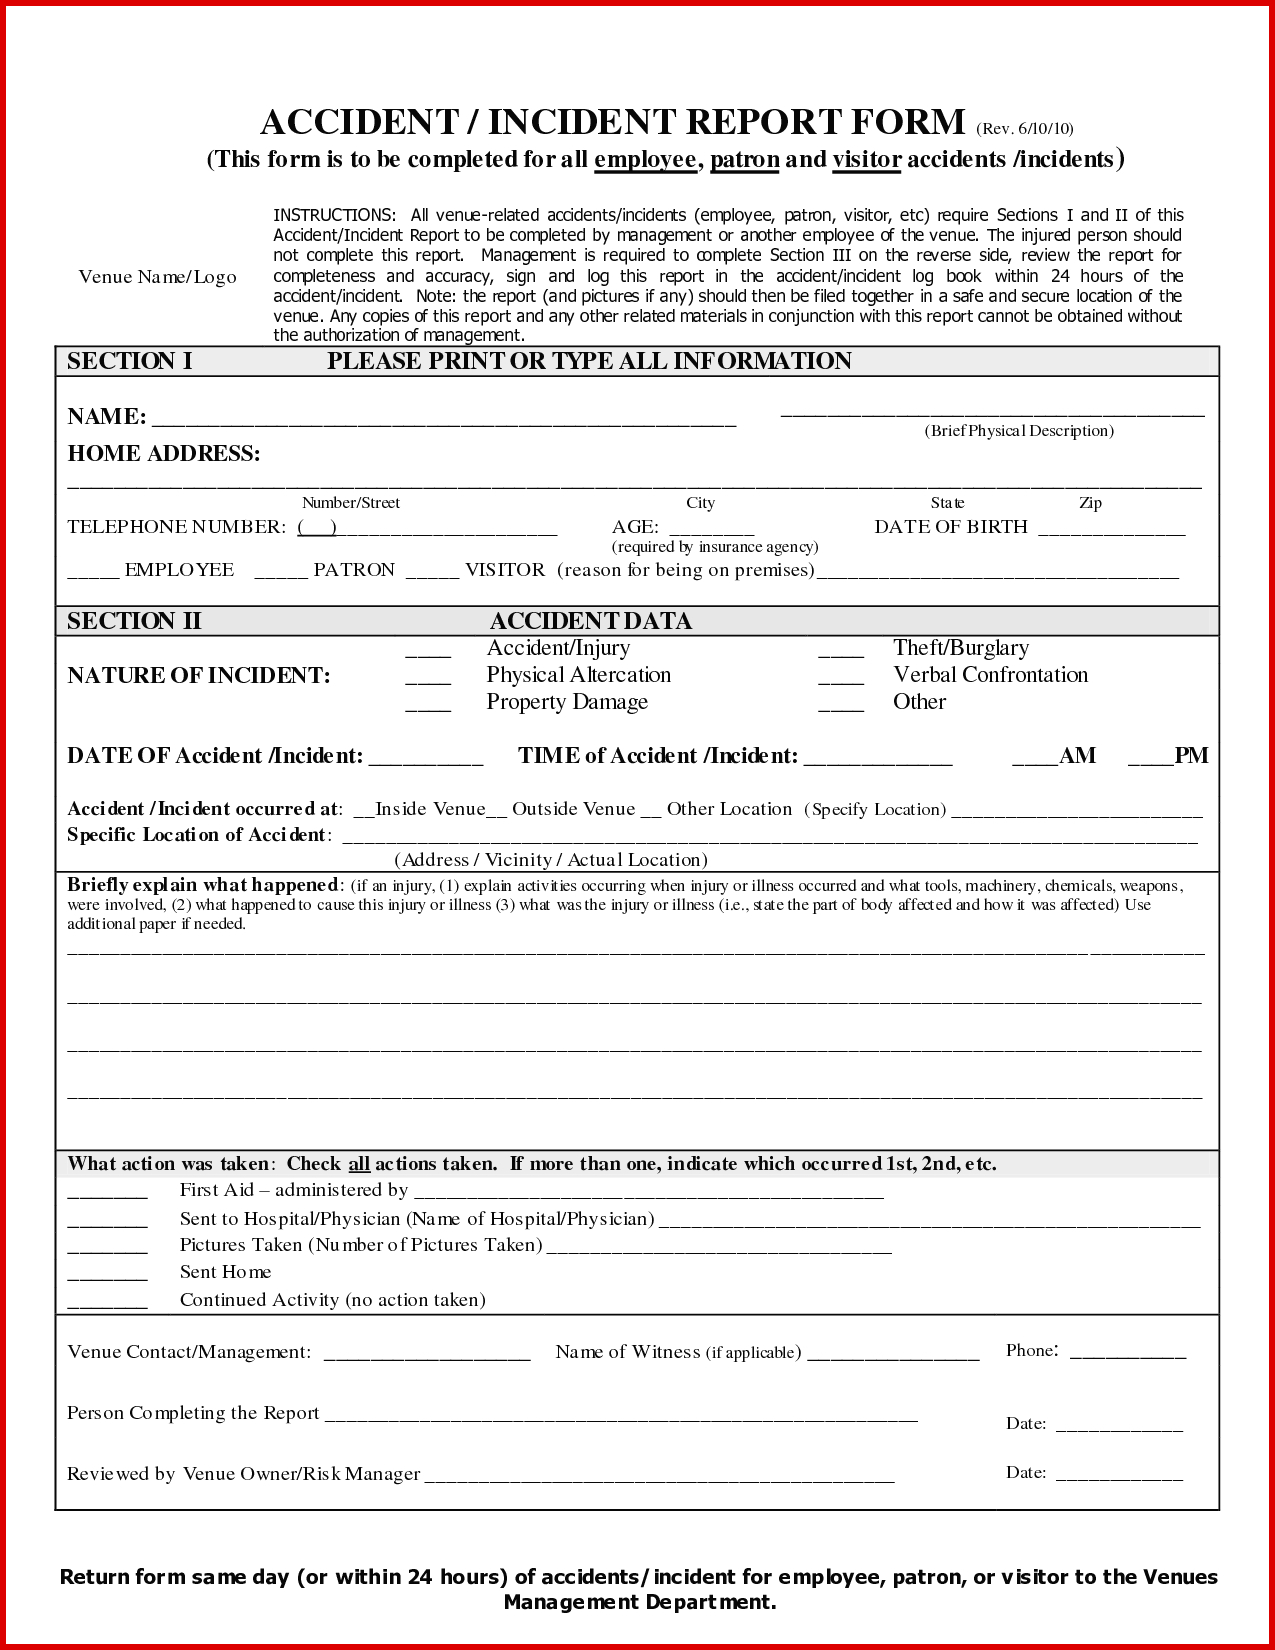 Form For Accident Incident Report Karis Sticken Co Injury With First Aid Incident Report Form Template